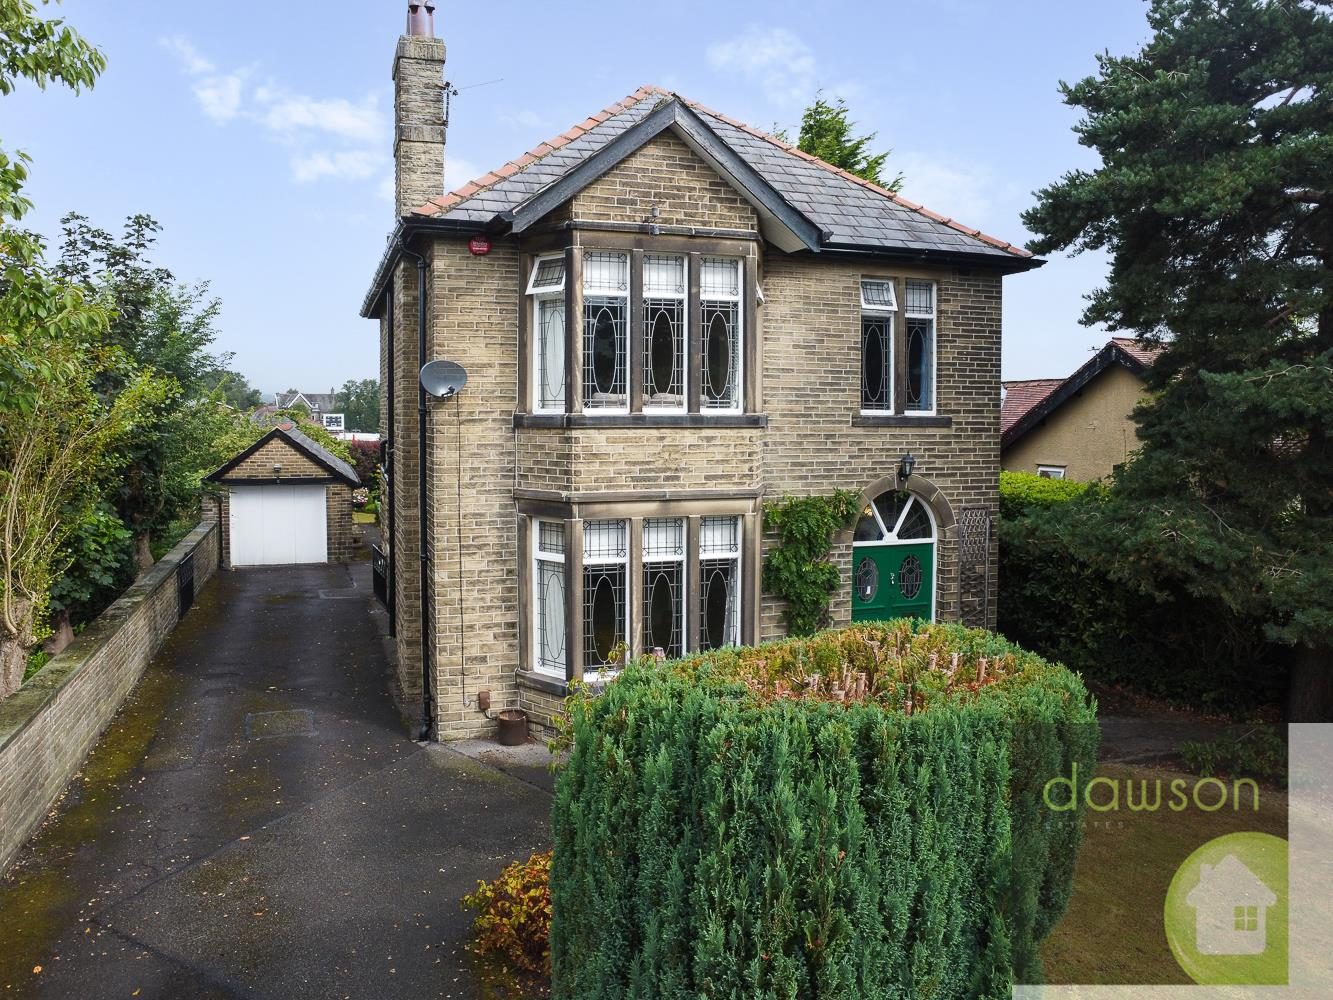 4 bed detached house for sale in Victoria Road, Elland, HX5 